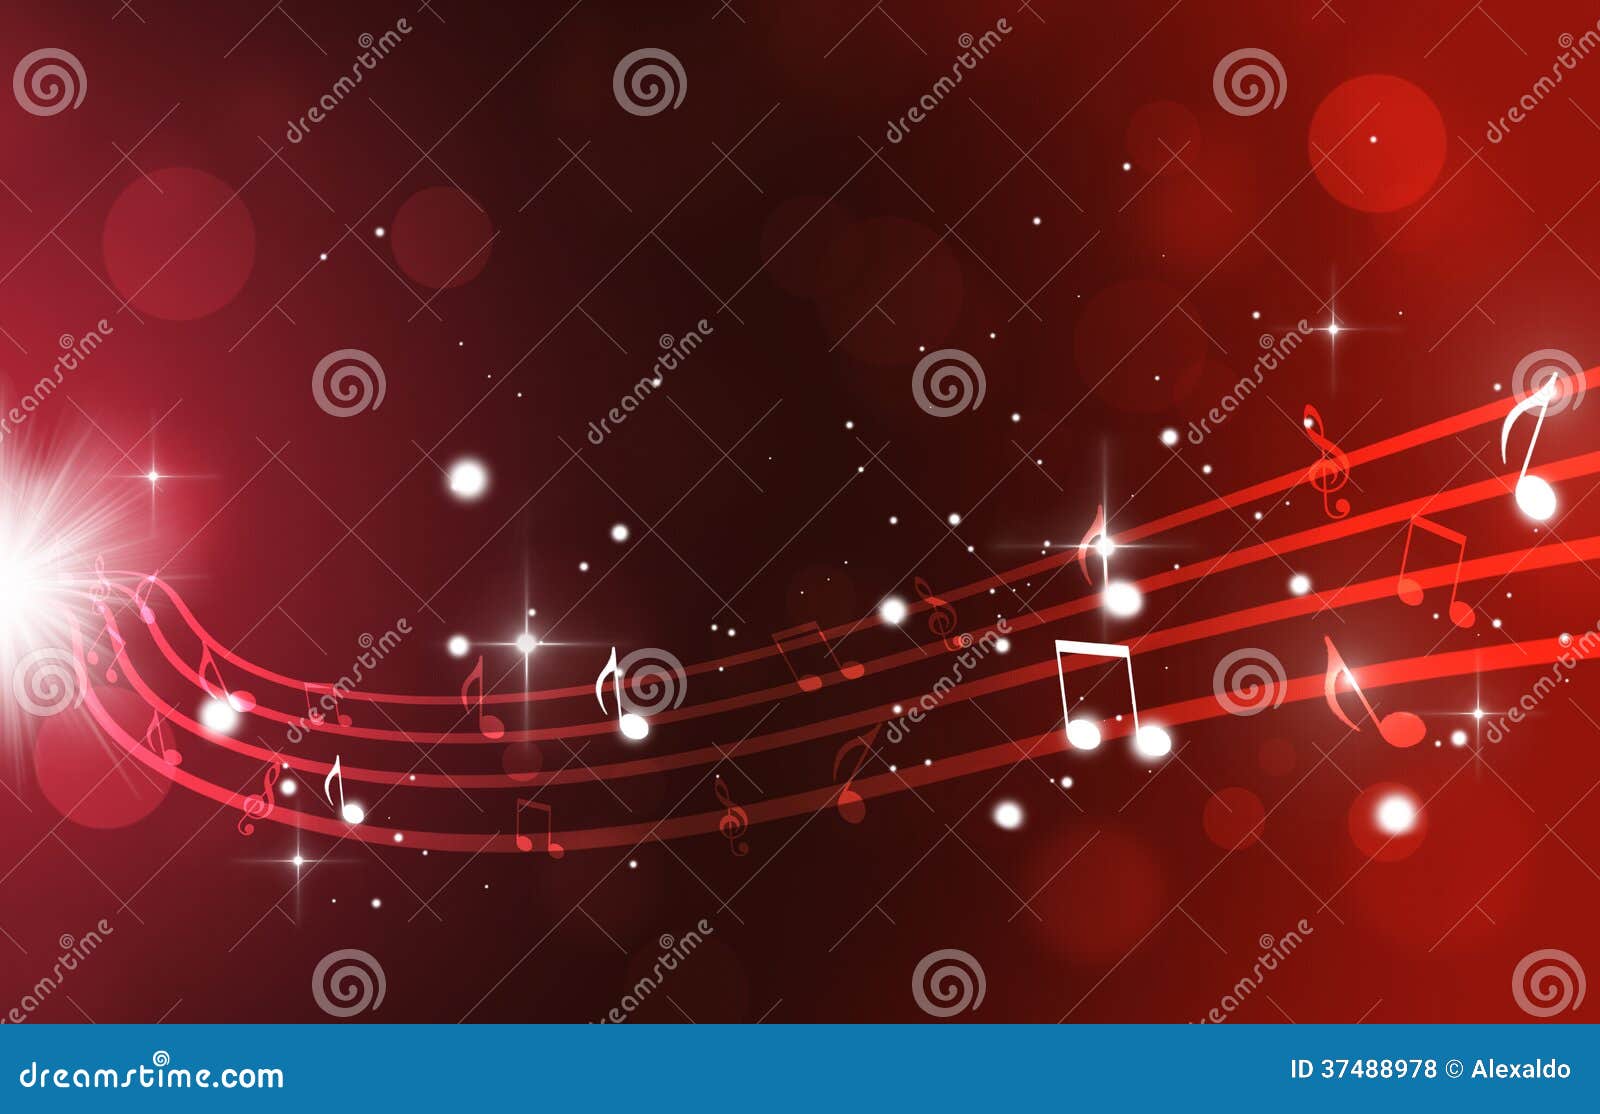 Music Notes on Red Background Stock Illustration - Illustration of dark,  abstract: 37488978